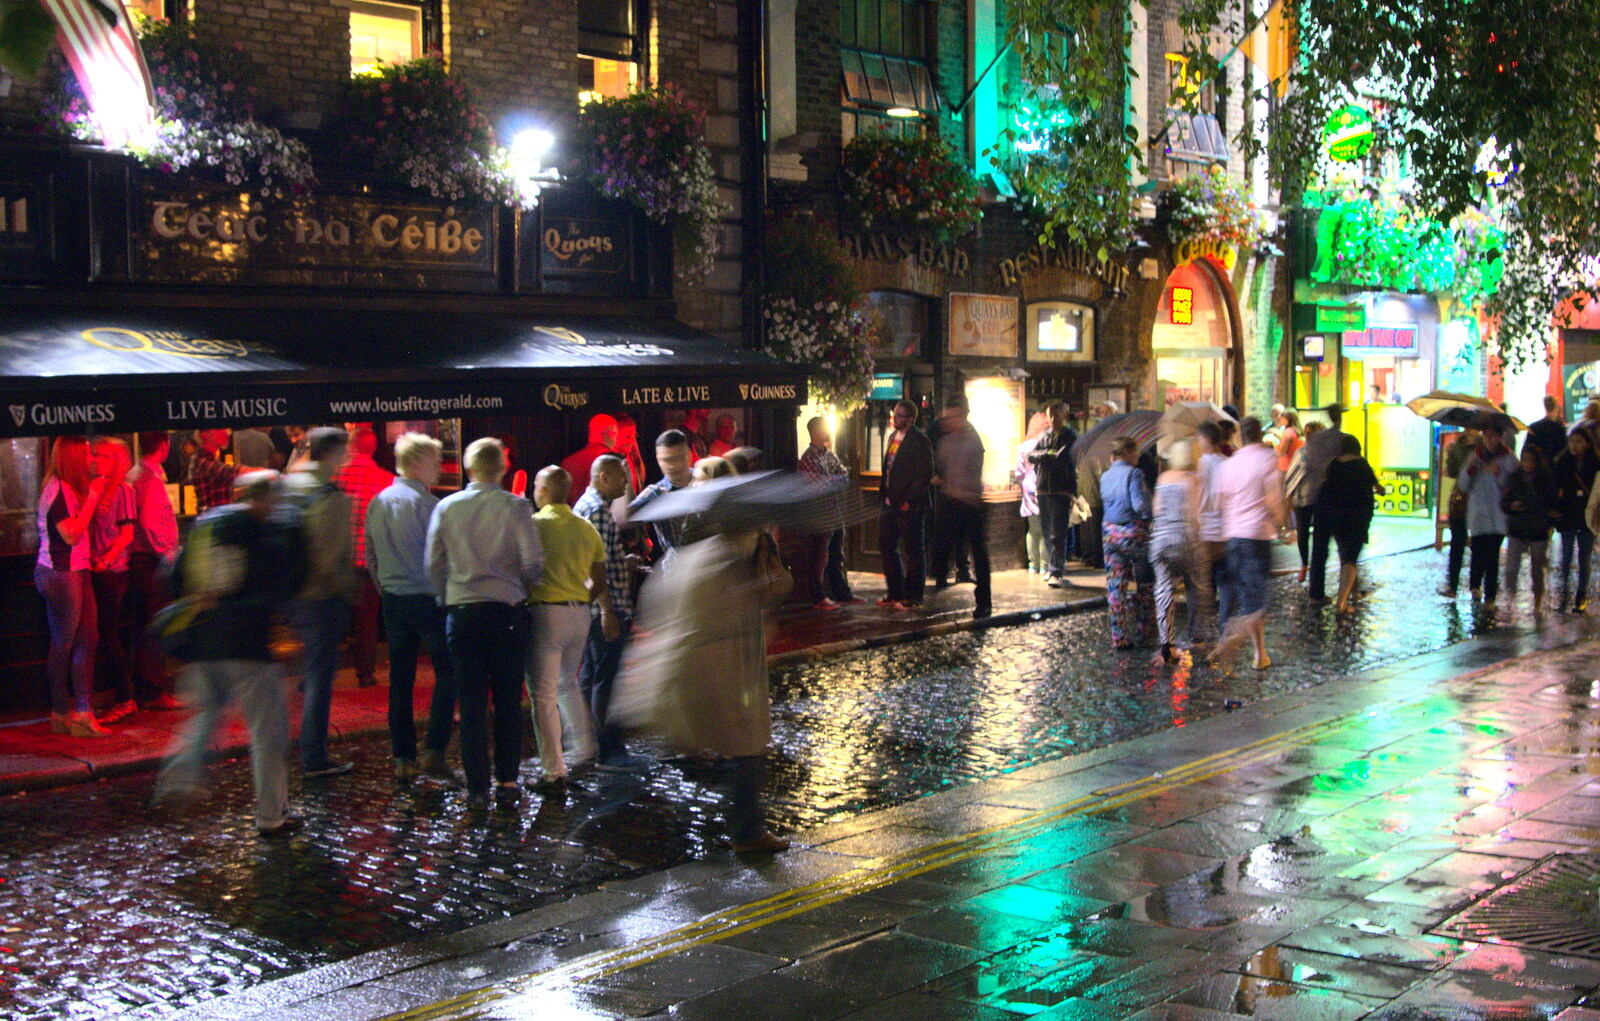 Crowds down in Temple Bar from A Night Out in Dublin, County Dublin, Ireland - 9th August 2014